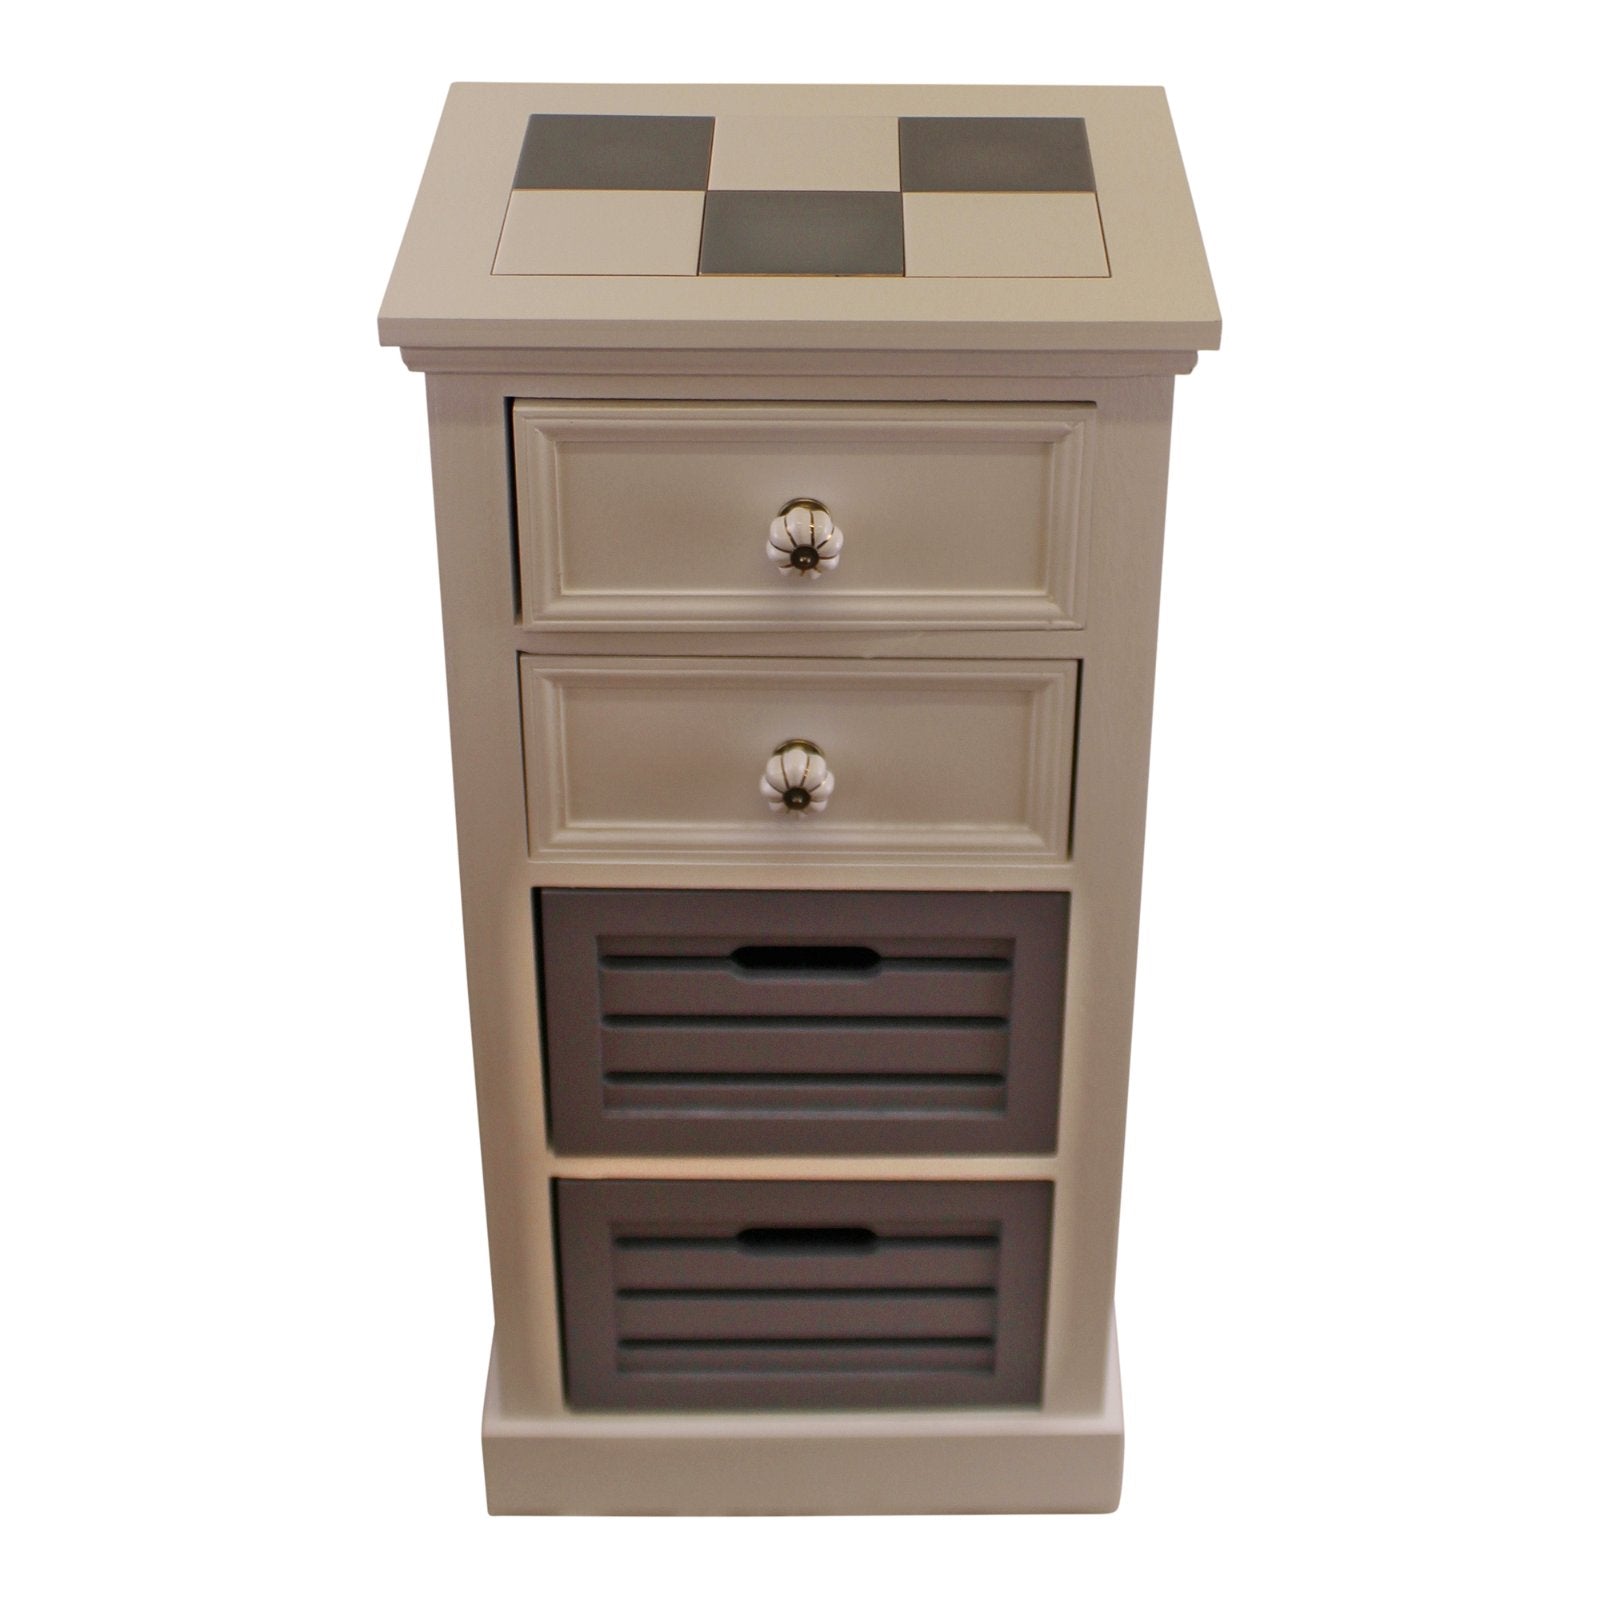 Contemporary Grey & White Chest Of Drawers, 4 Drawers